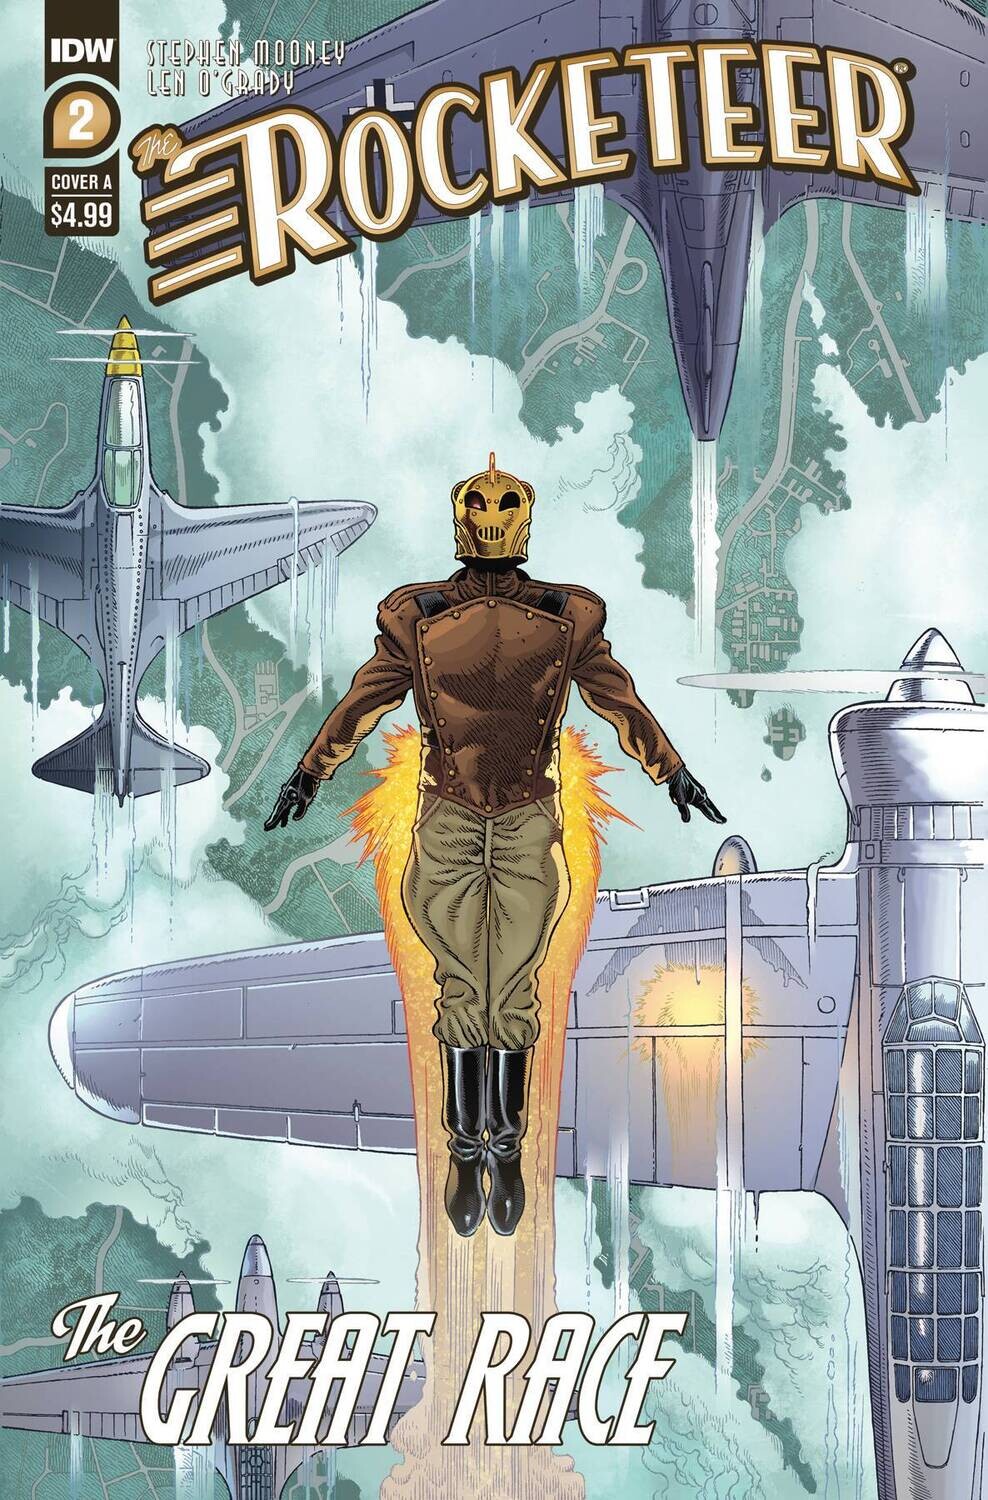 ROCKETEER THE GREAT RACE #2 COVER A